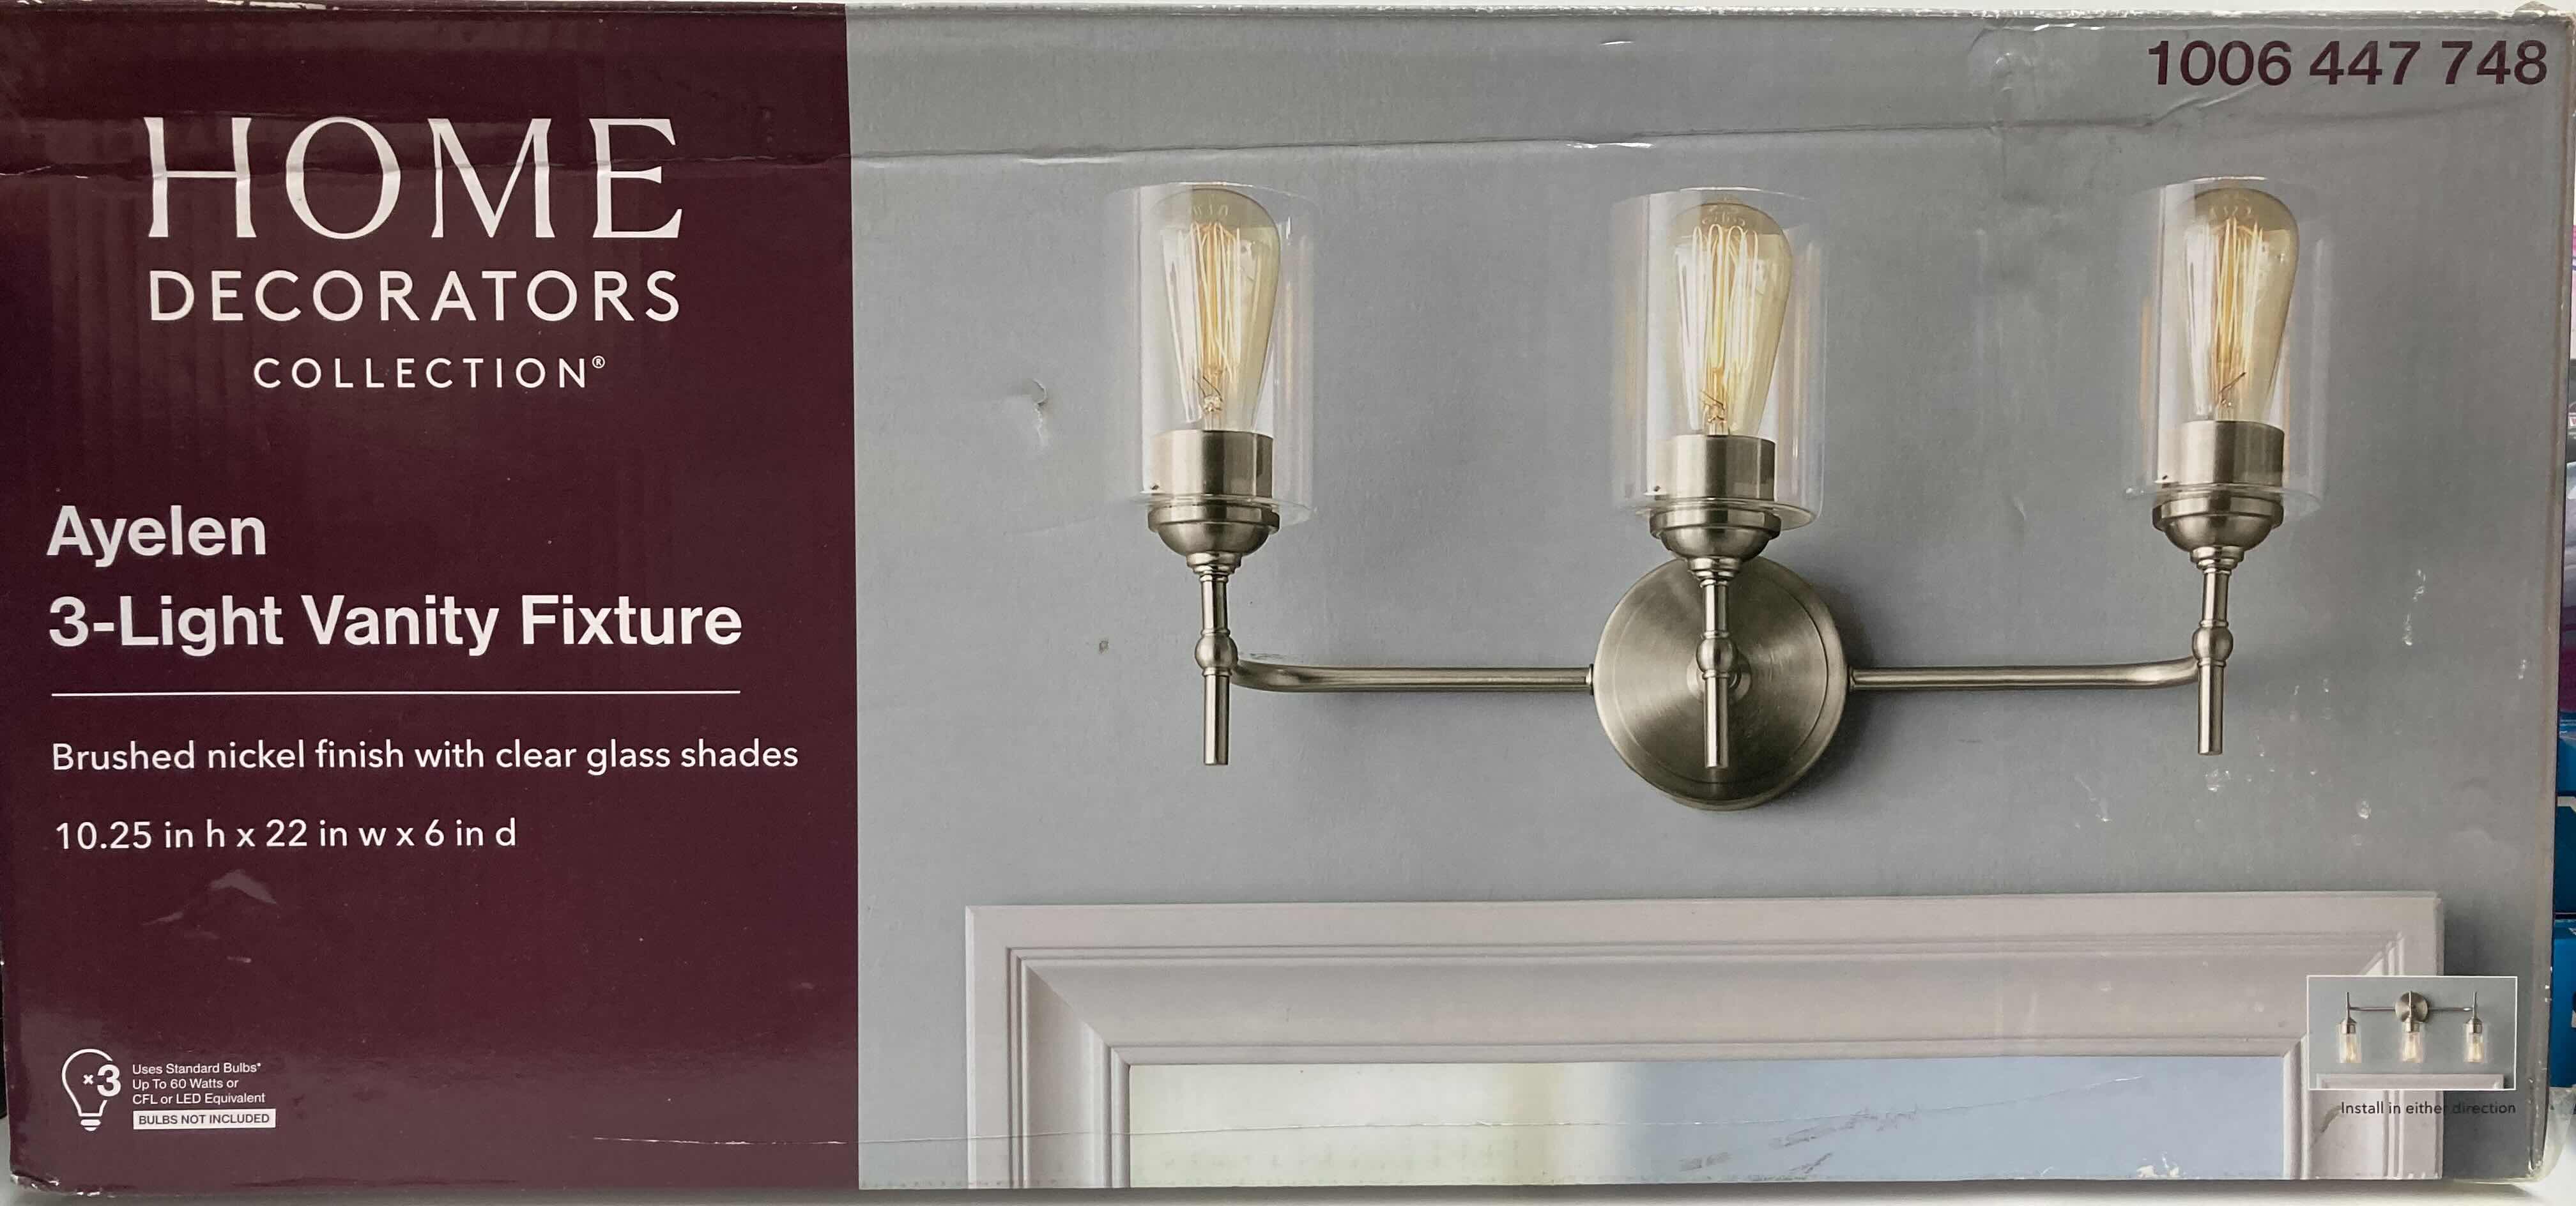 Photo 5 of HOME DECORATORS COLLECTION AYELEN BRUSHED NICKEL FINISH 3-LIGHT VANITY FIXTURE W CLEAR GLASS SHADE MODEL 39109-HBU 22” X 6” H10.25”